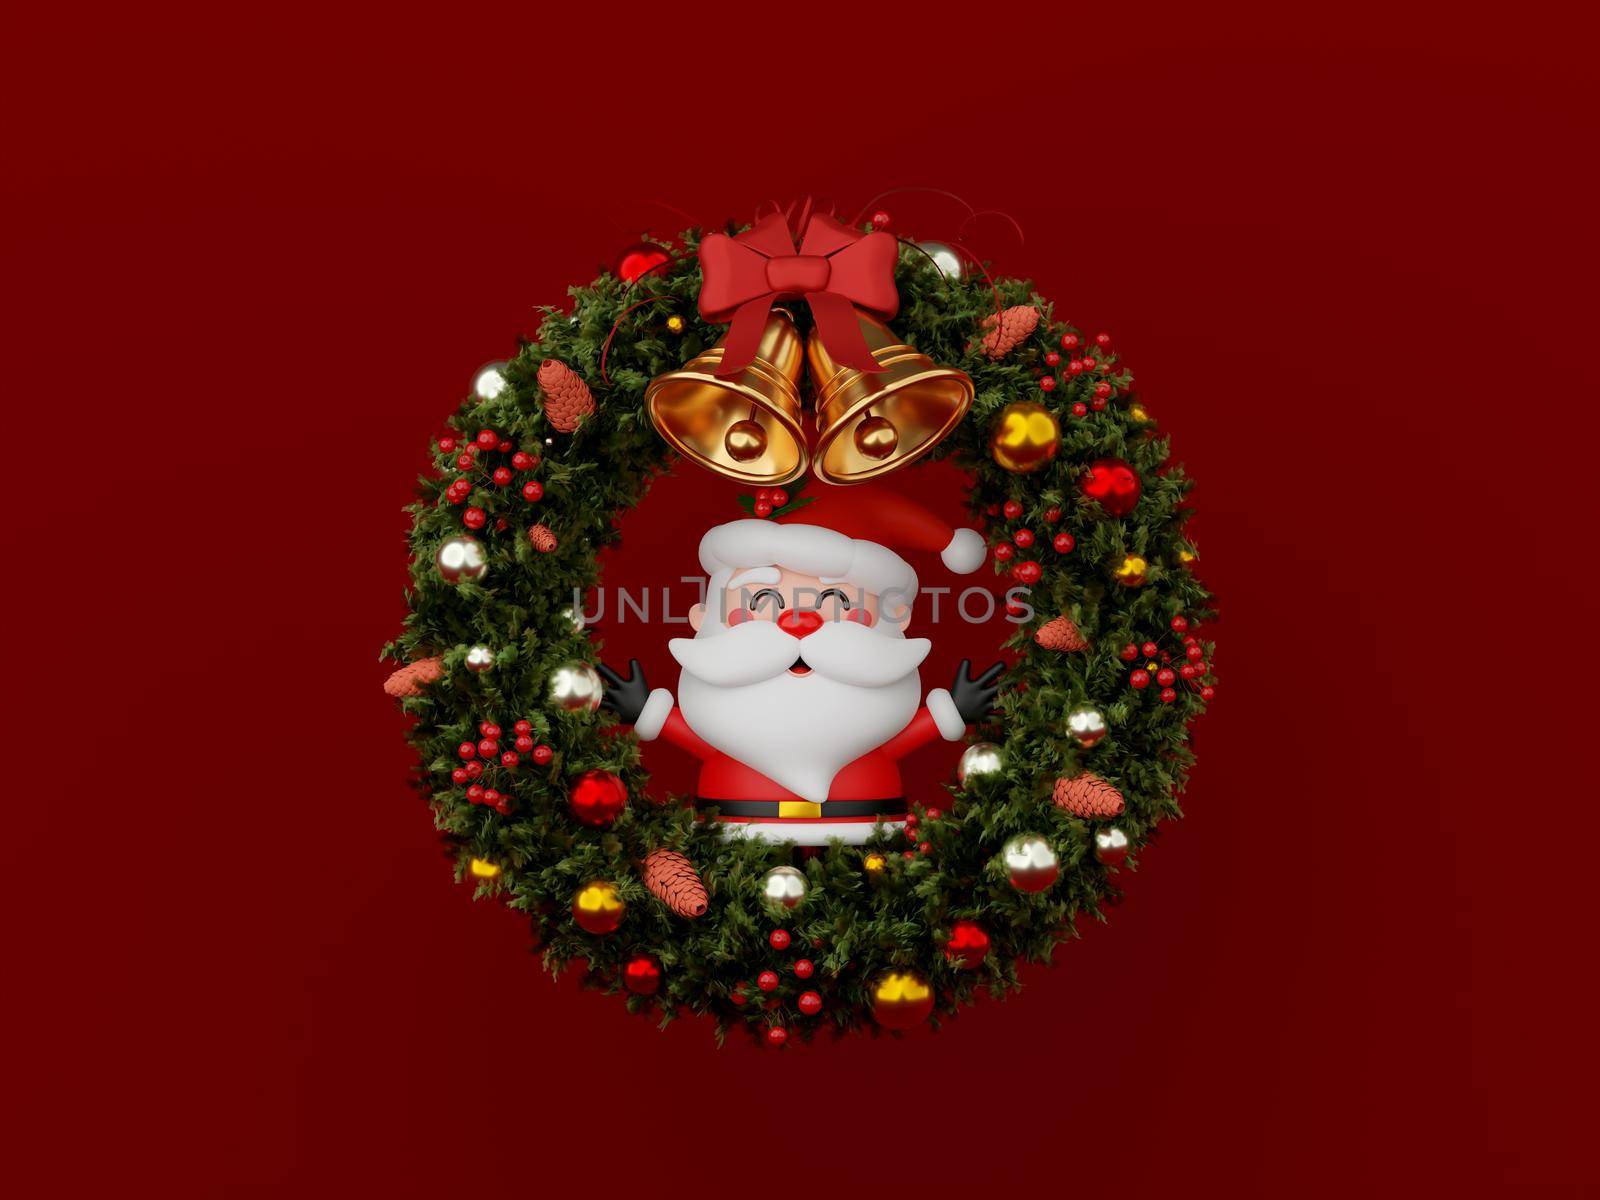 Christmas banner of Santa Claus with Christmas wreath on red background, 3d illustration